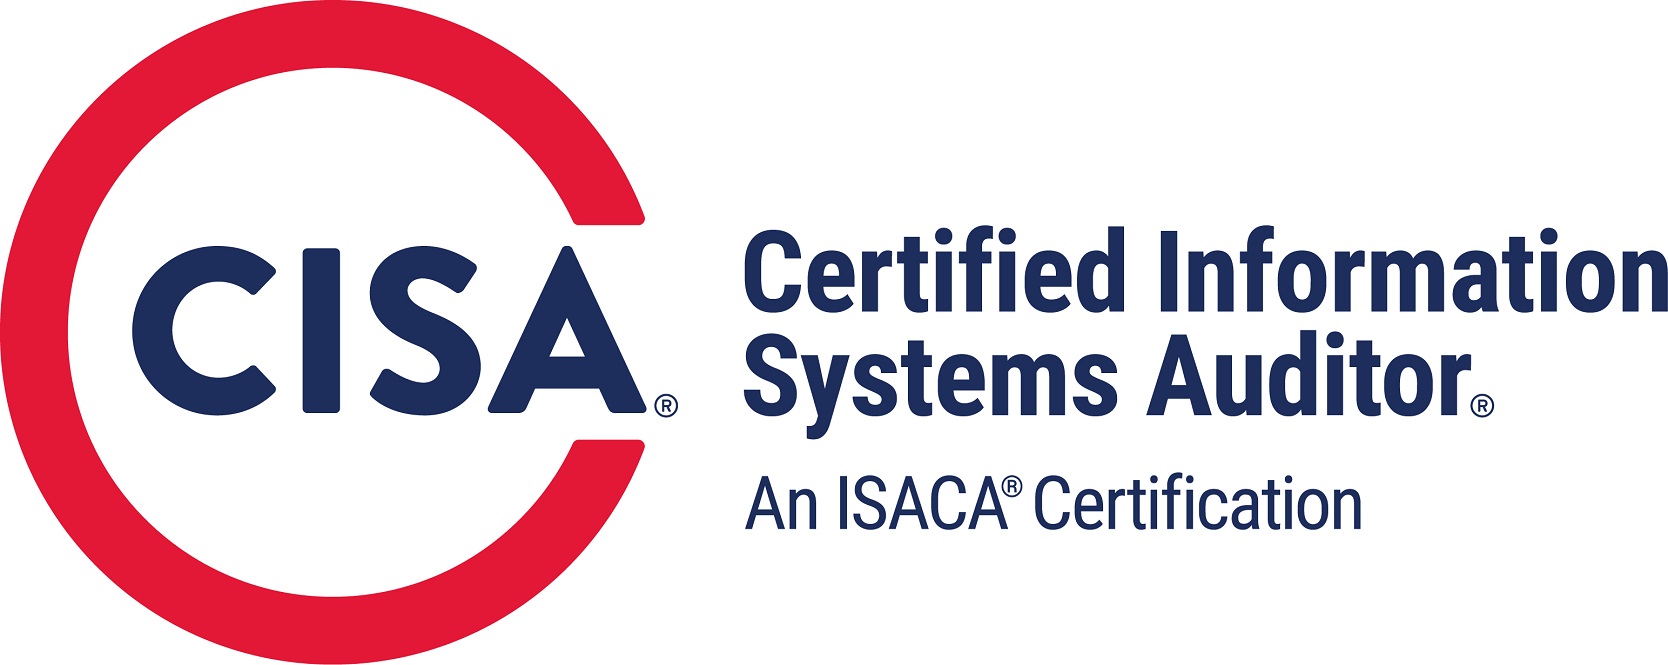 logo CISA certification, Certified Information Systems Auditor